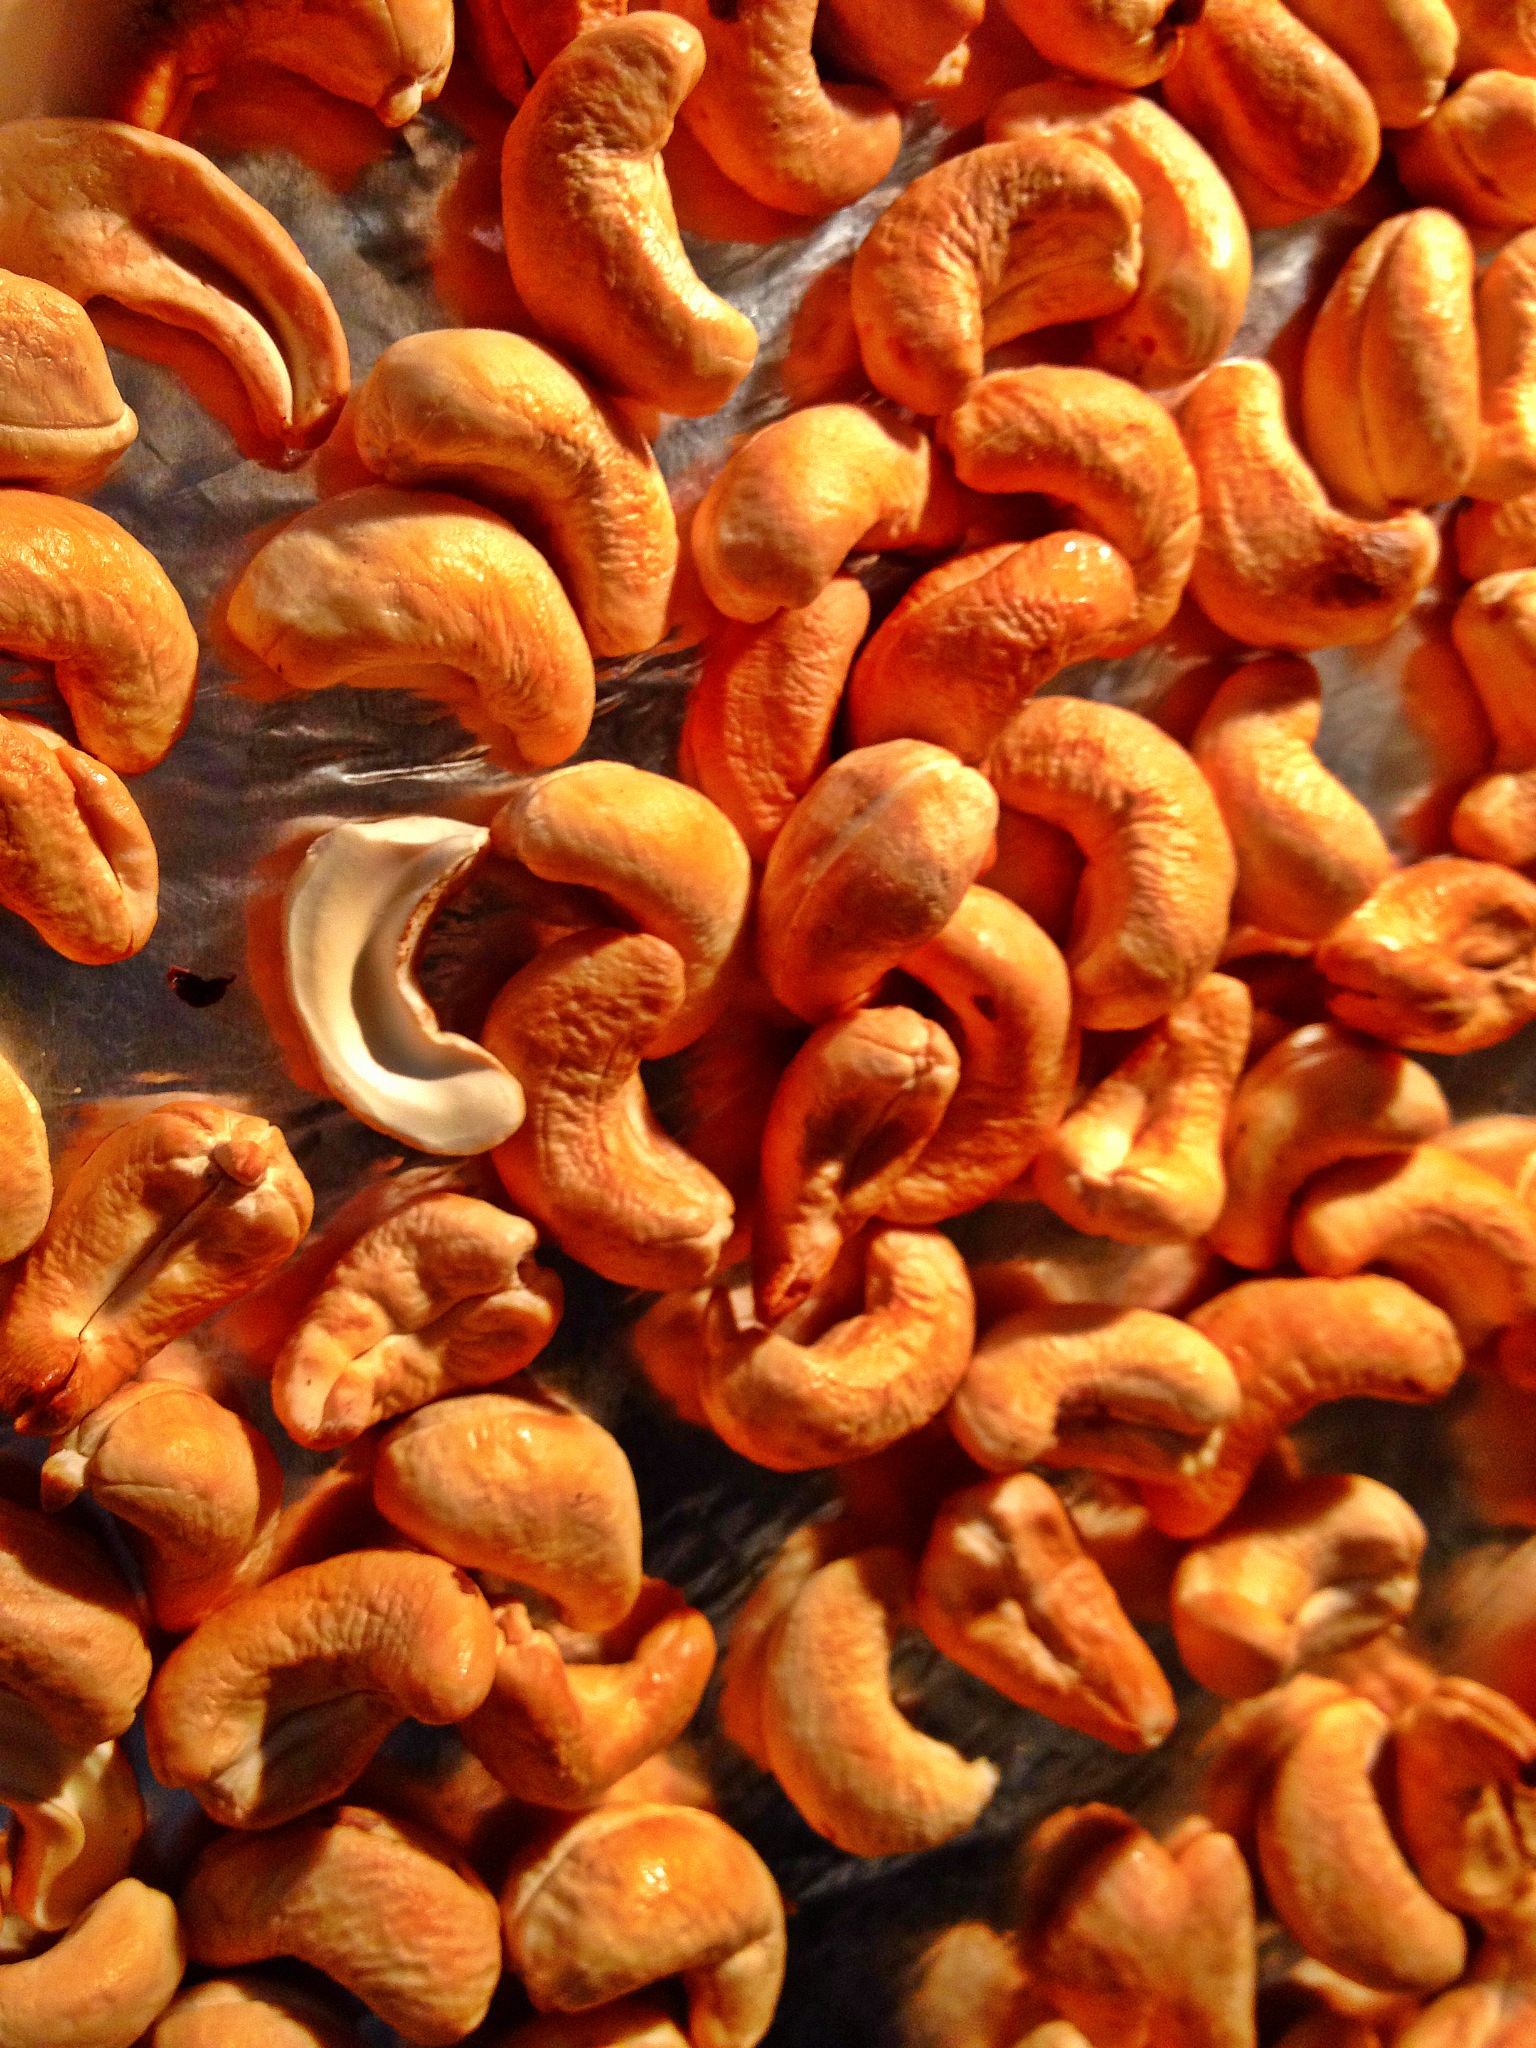 Oven-roasted cashews after 15 minutes at 350F